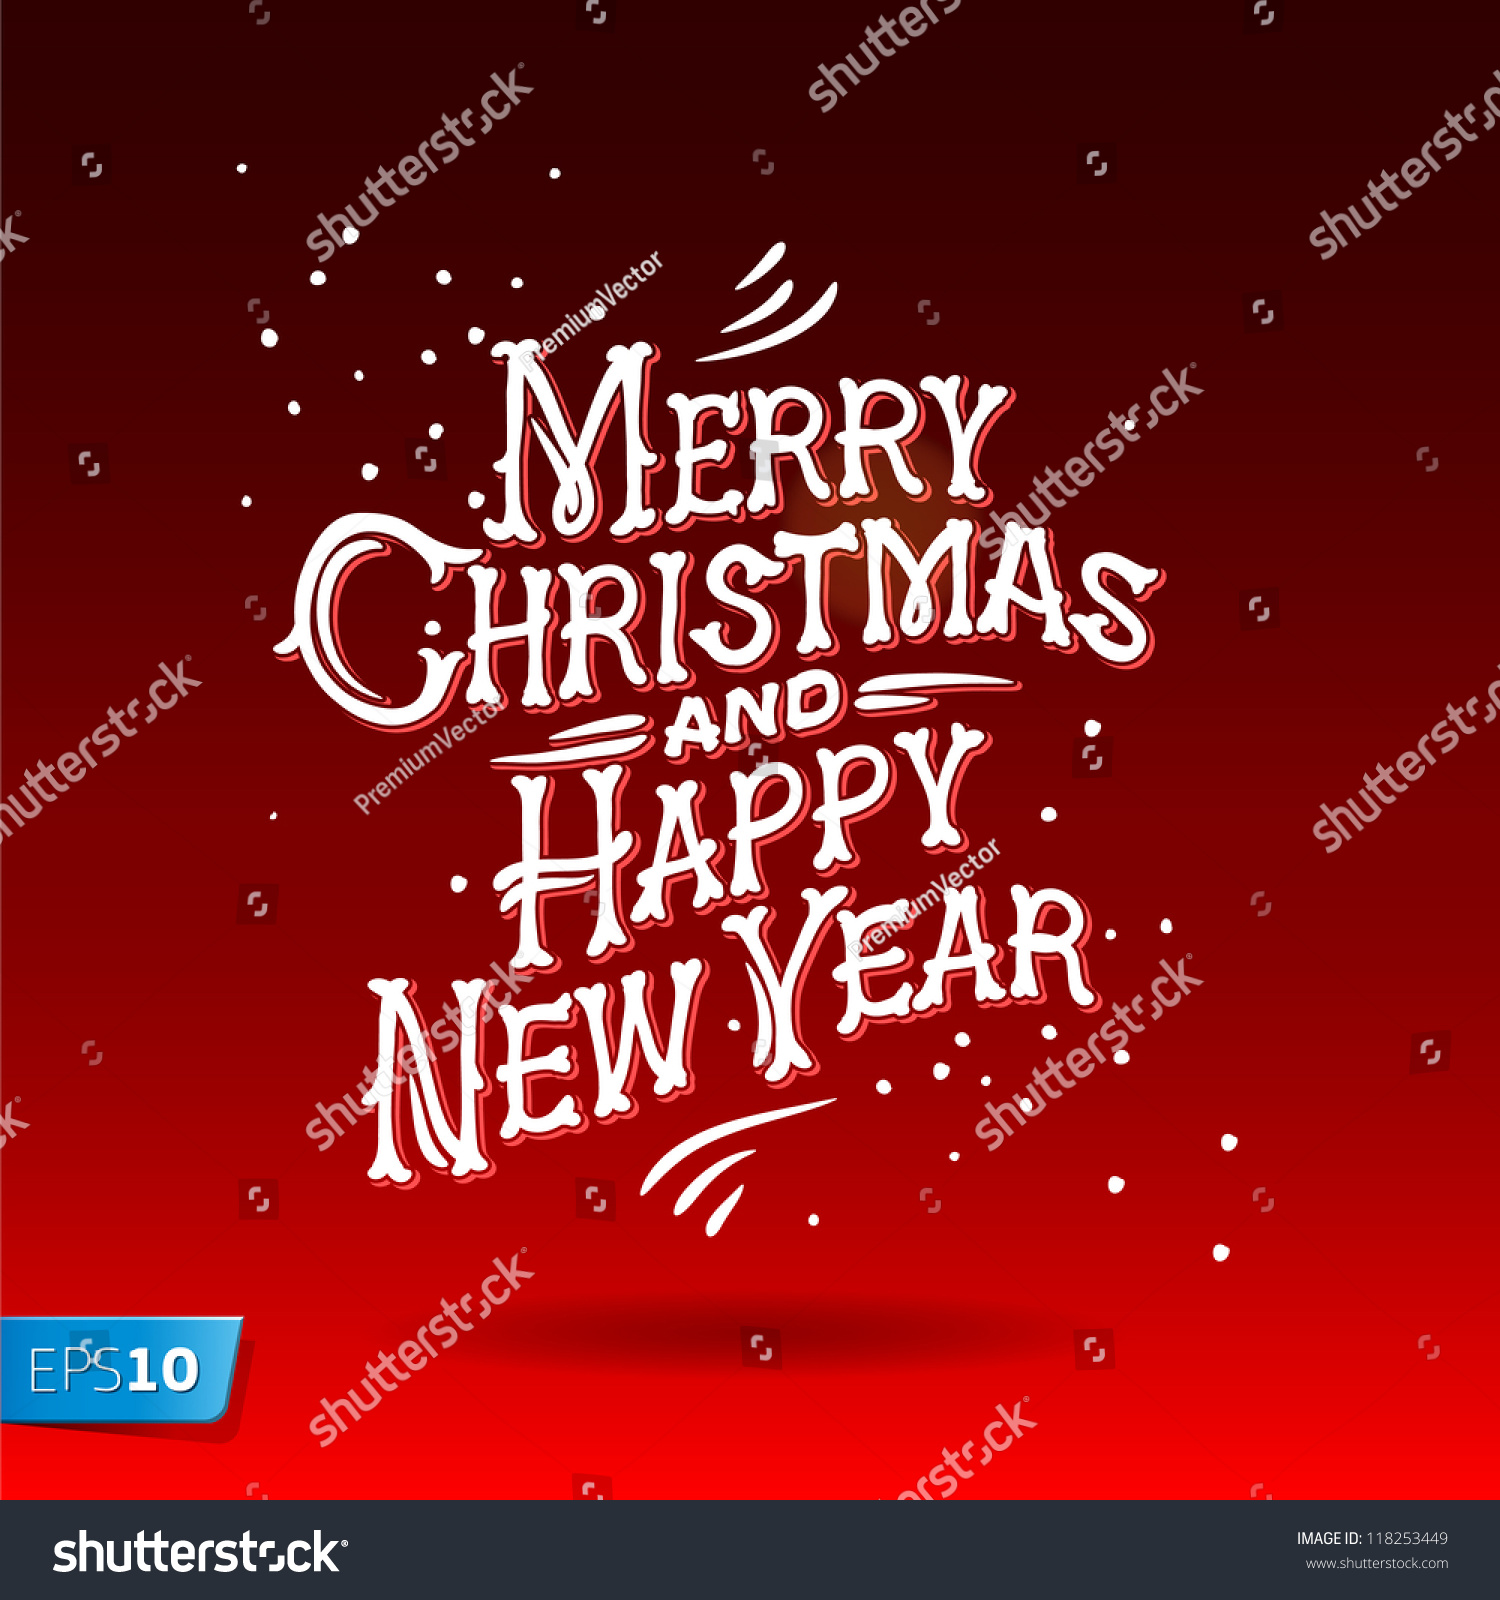 Merry Christmas and Happy New Year Greeting Card lettering vector illustration